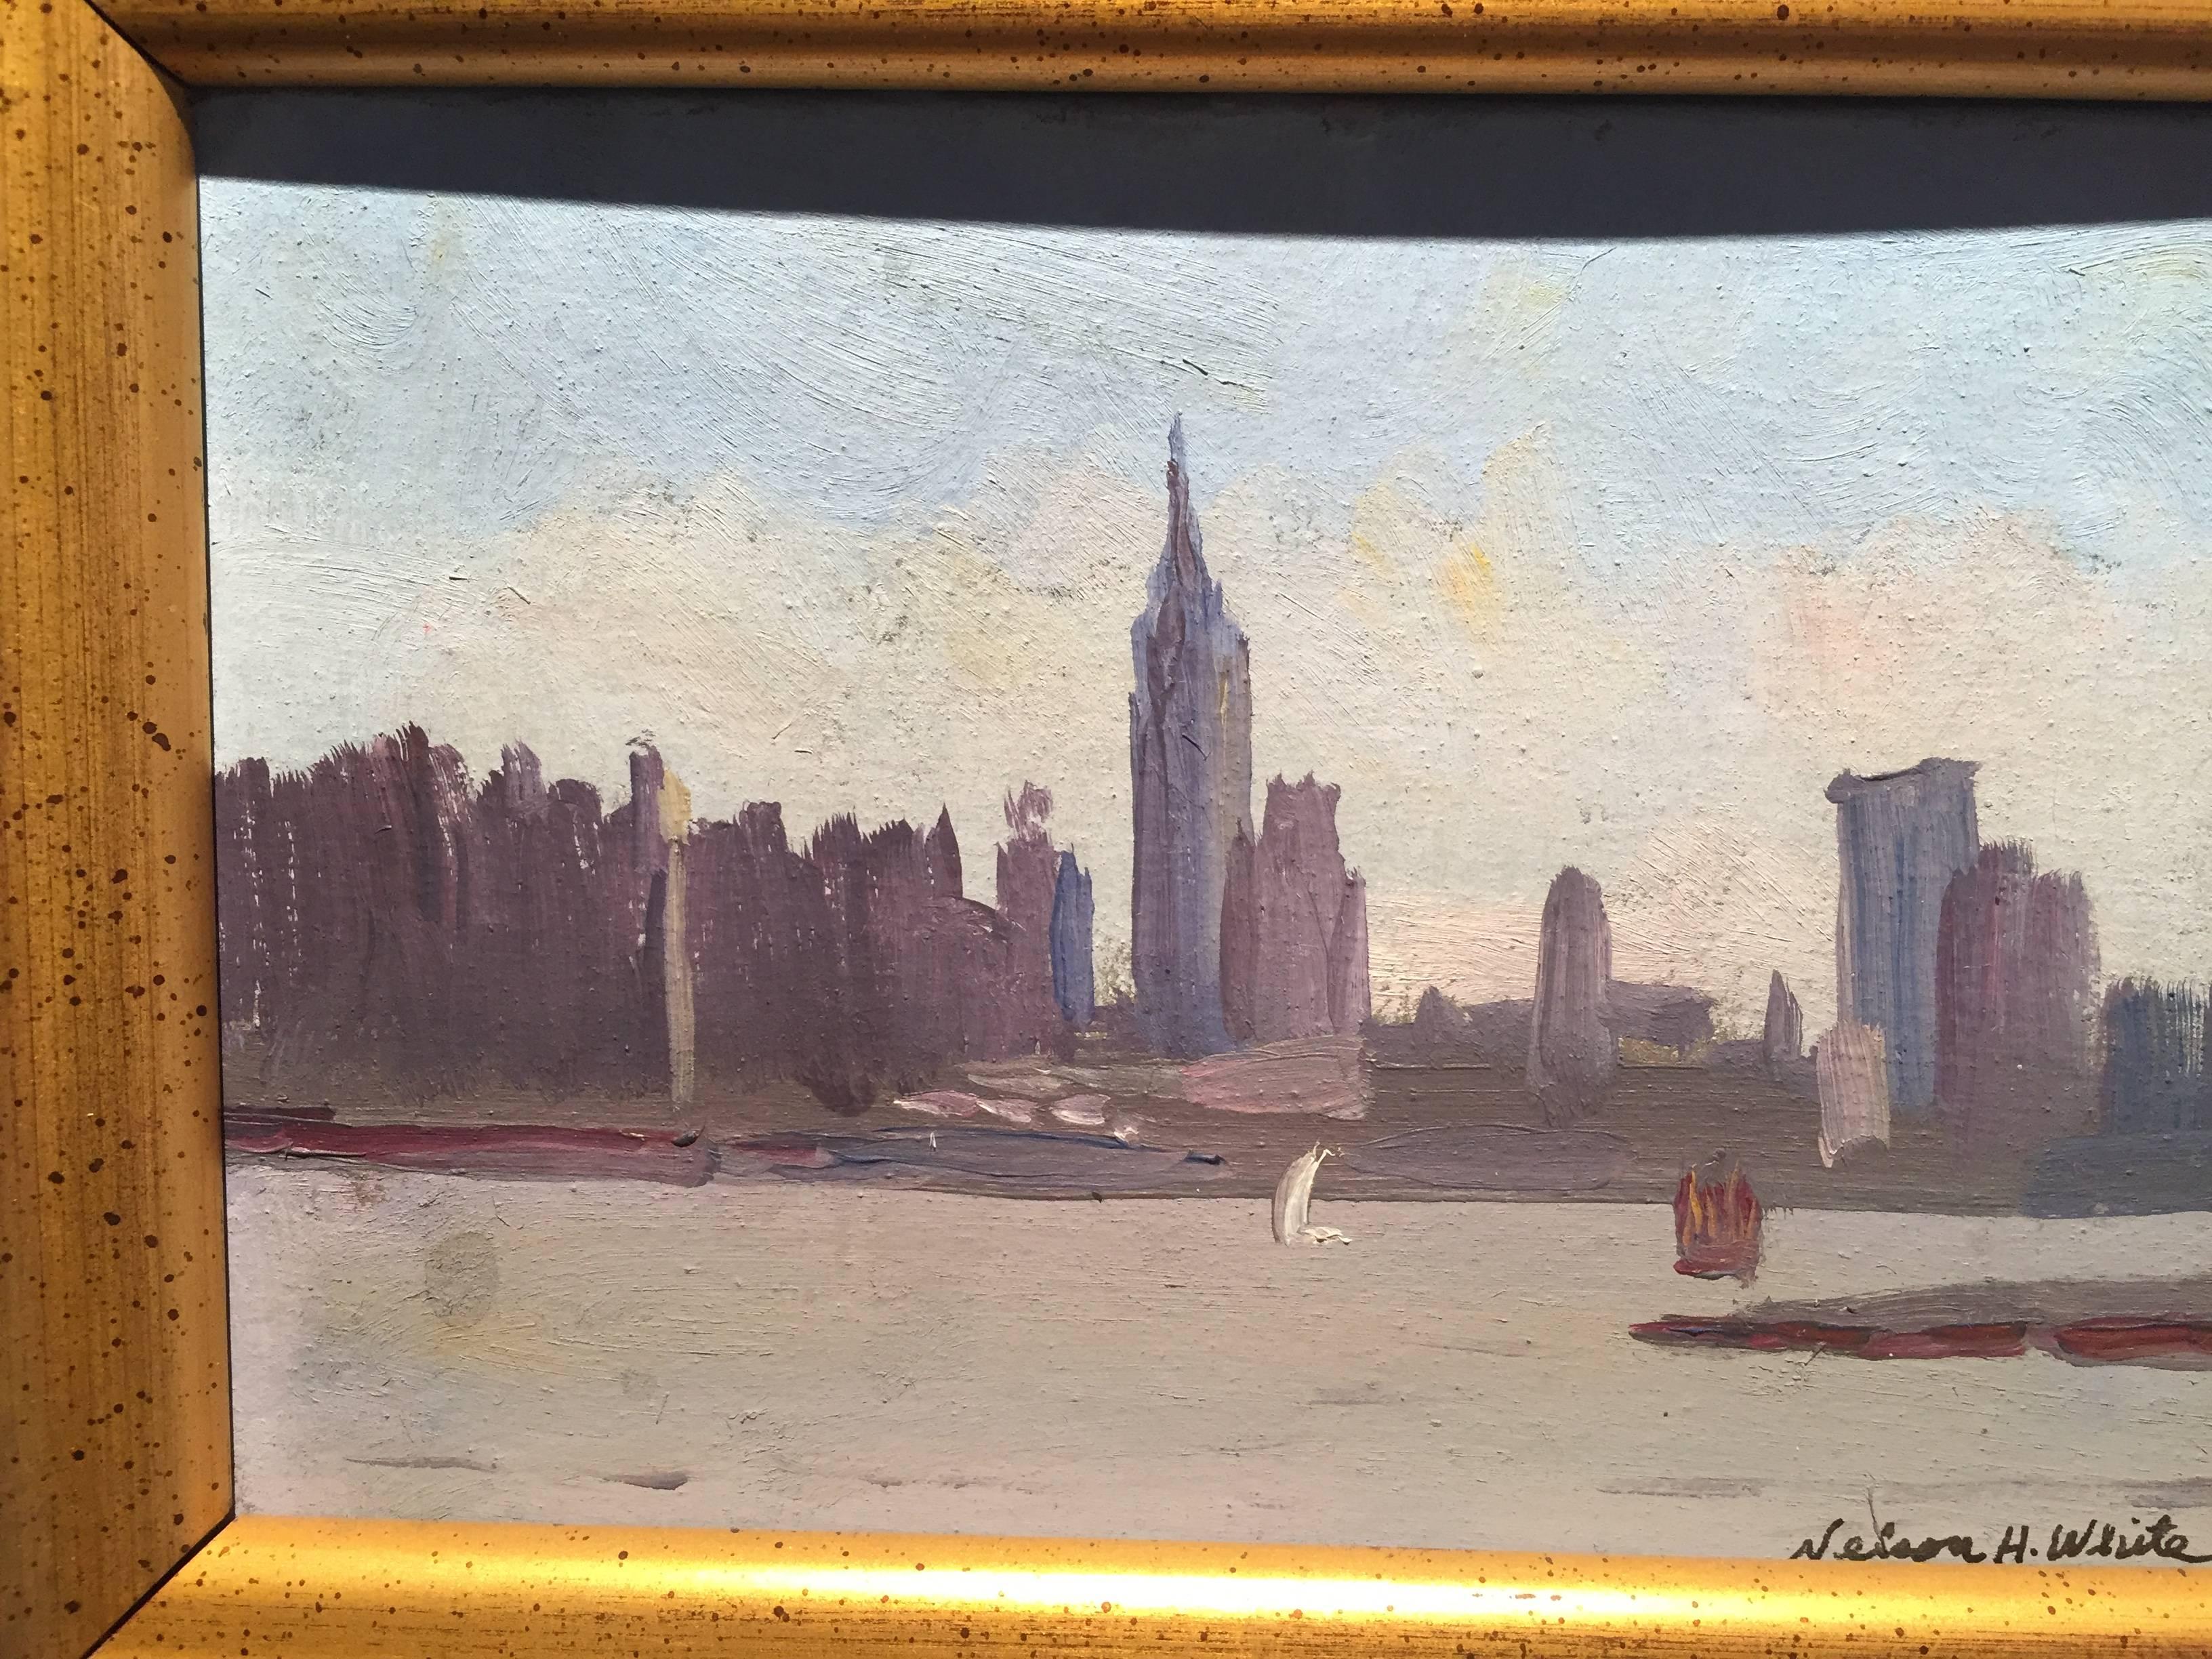 Painted en plein air across from the imposing New York City Skyline. A few quick brushstrokes against a white background make up the familiar scene on an overcast day. A small dash of white along the water's horizon makes a sailboat. The silver